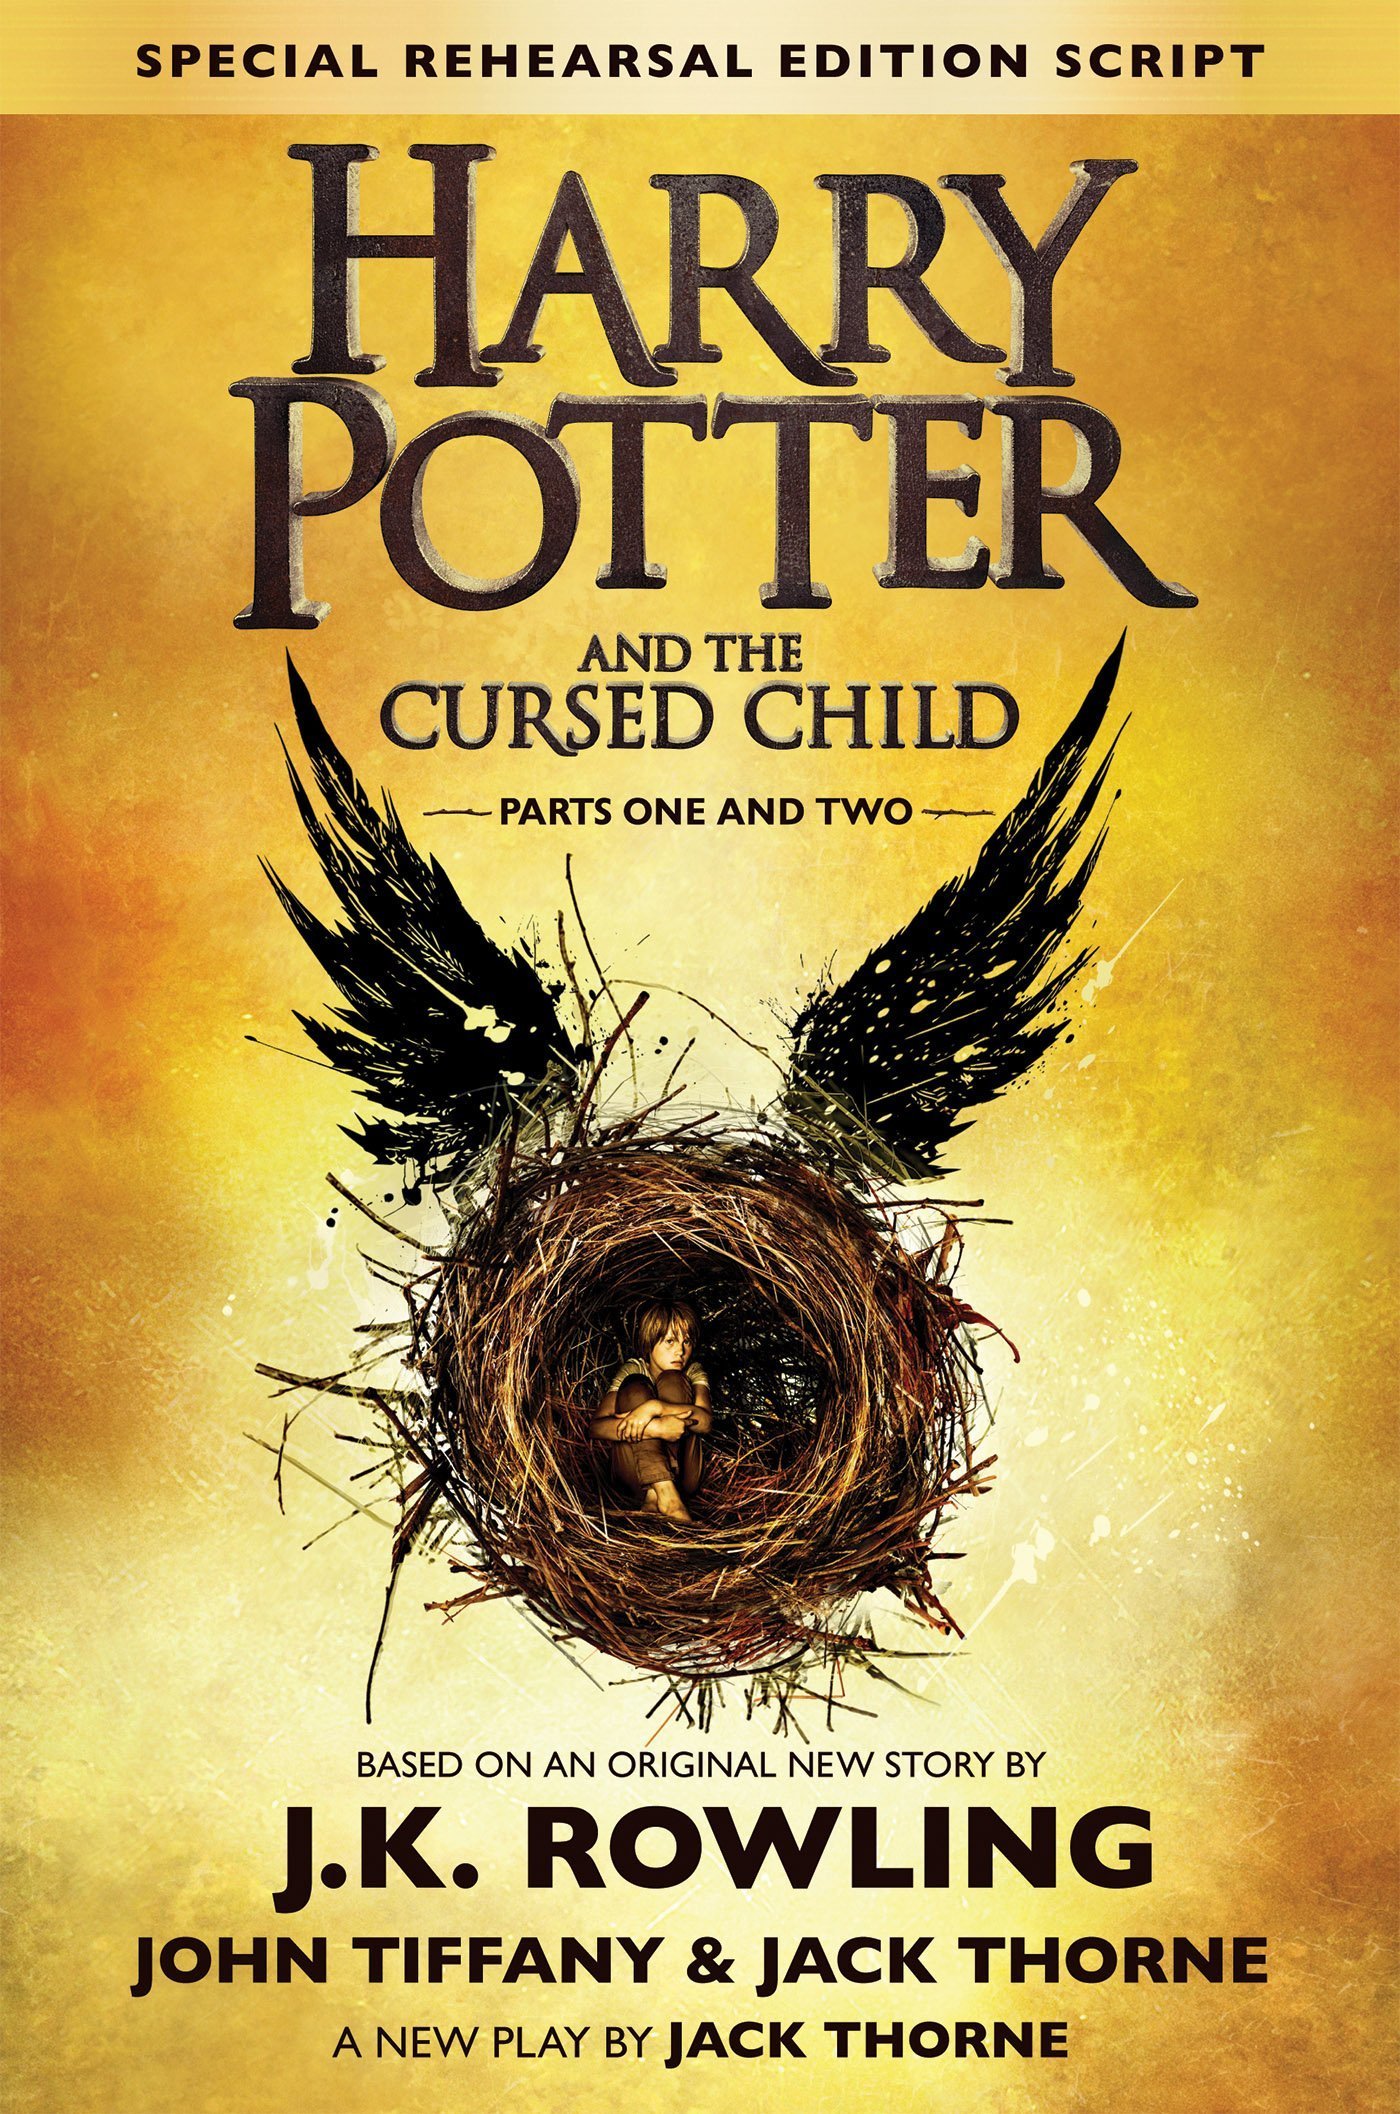 The Cursed Child Review